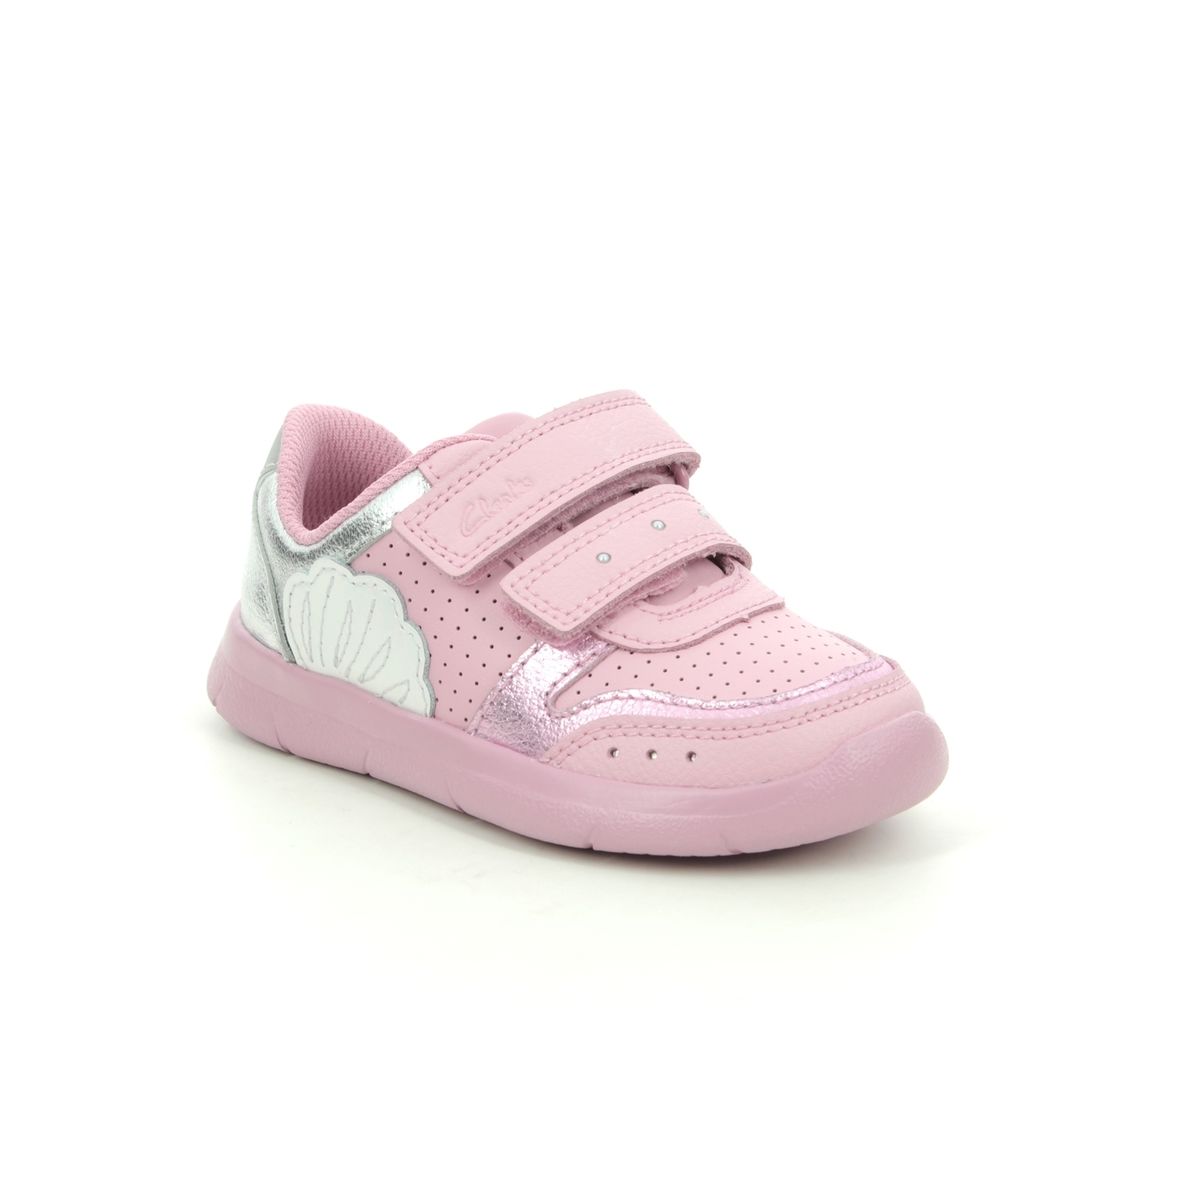 clarks infant trainers sale